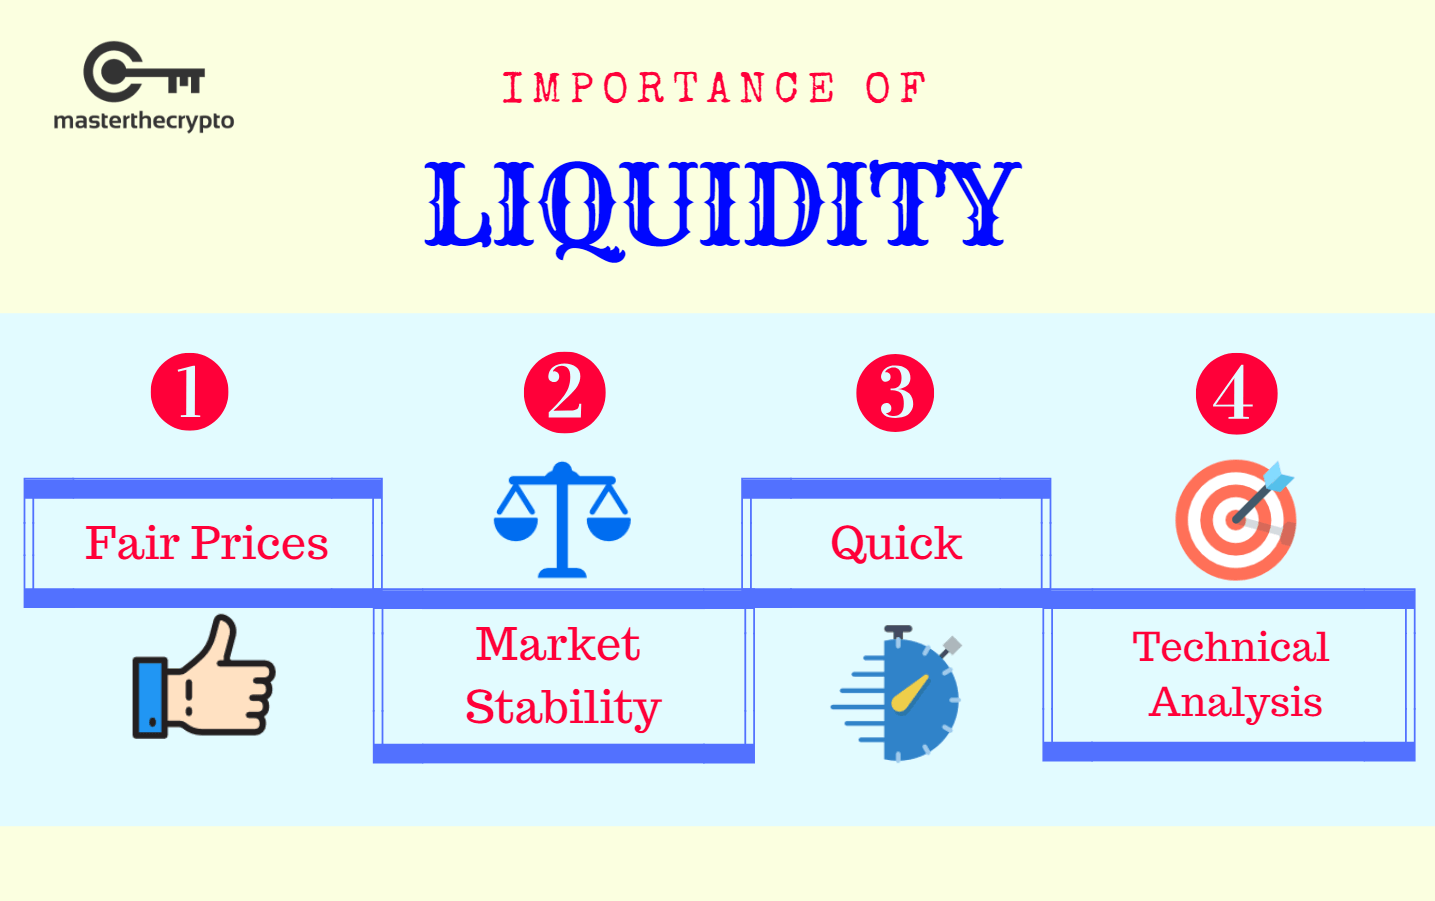 how does liquidity affect price crypto